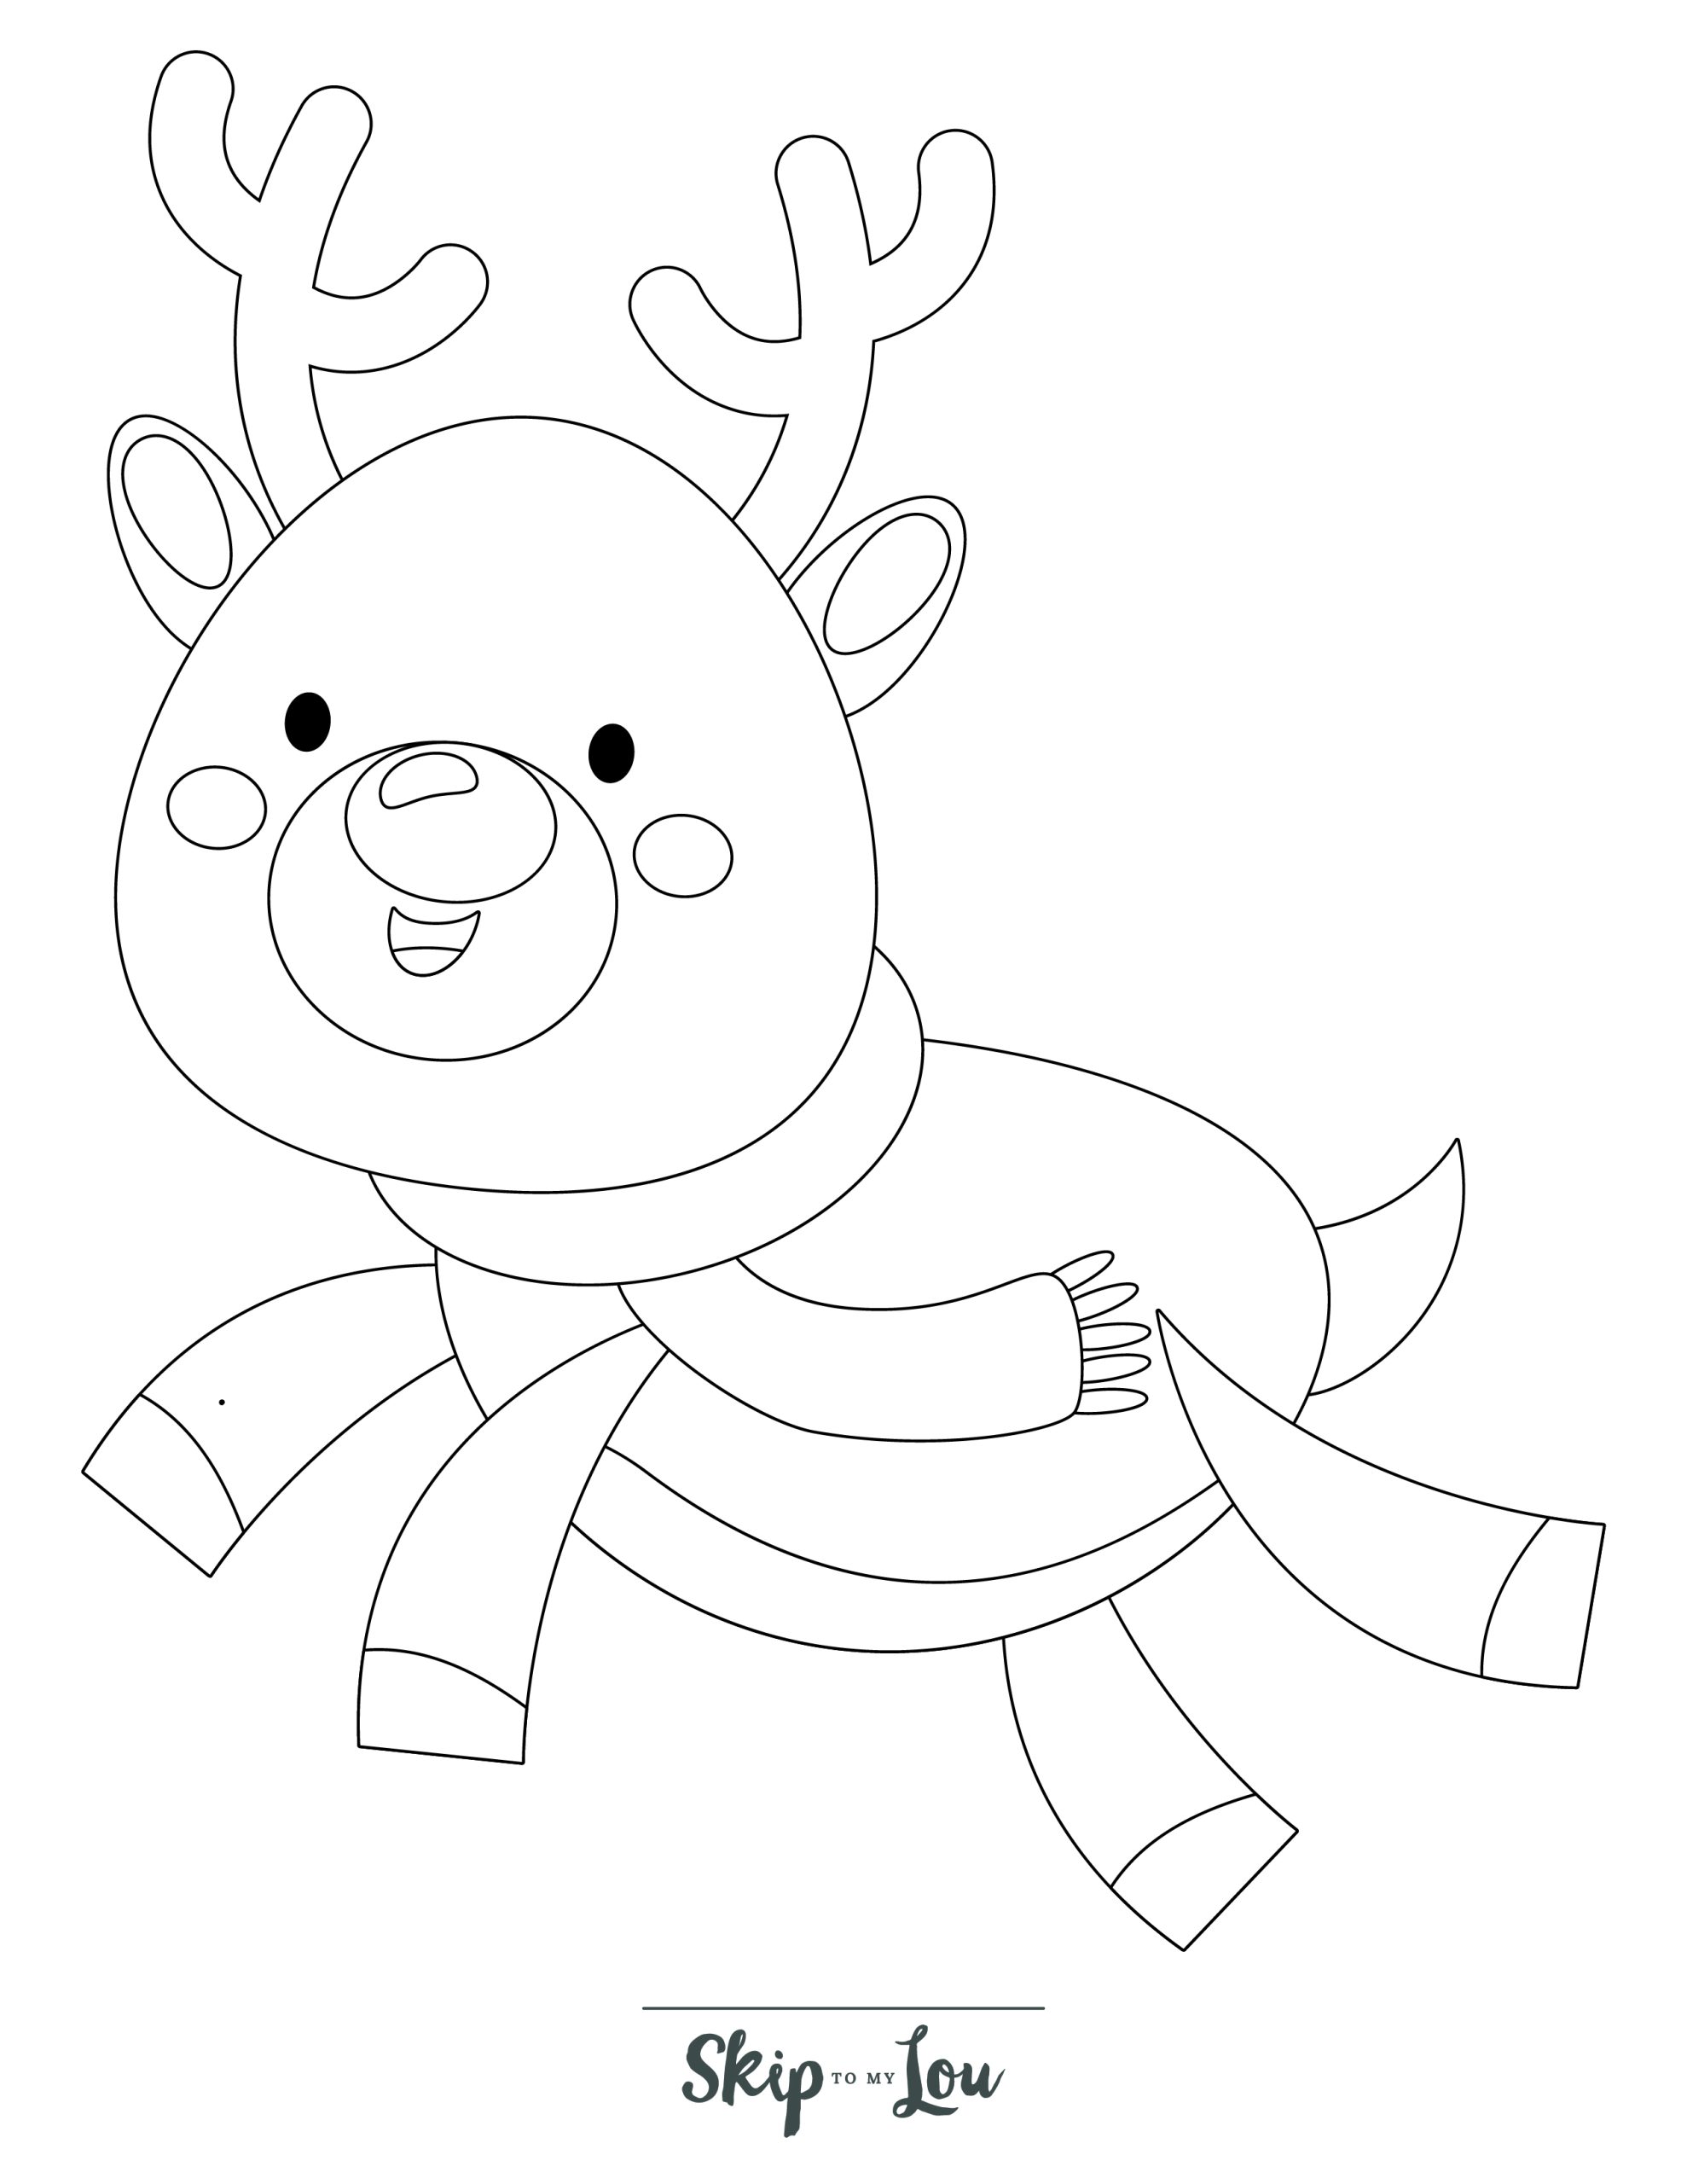 Reindeer Coloring Page 7 - Line drawing of flying reindeer with a scarf and antlers